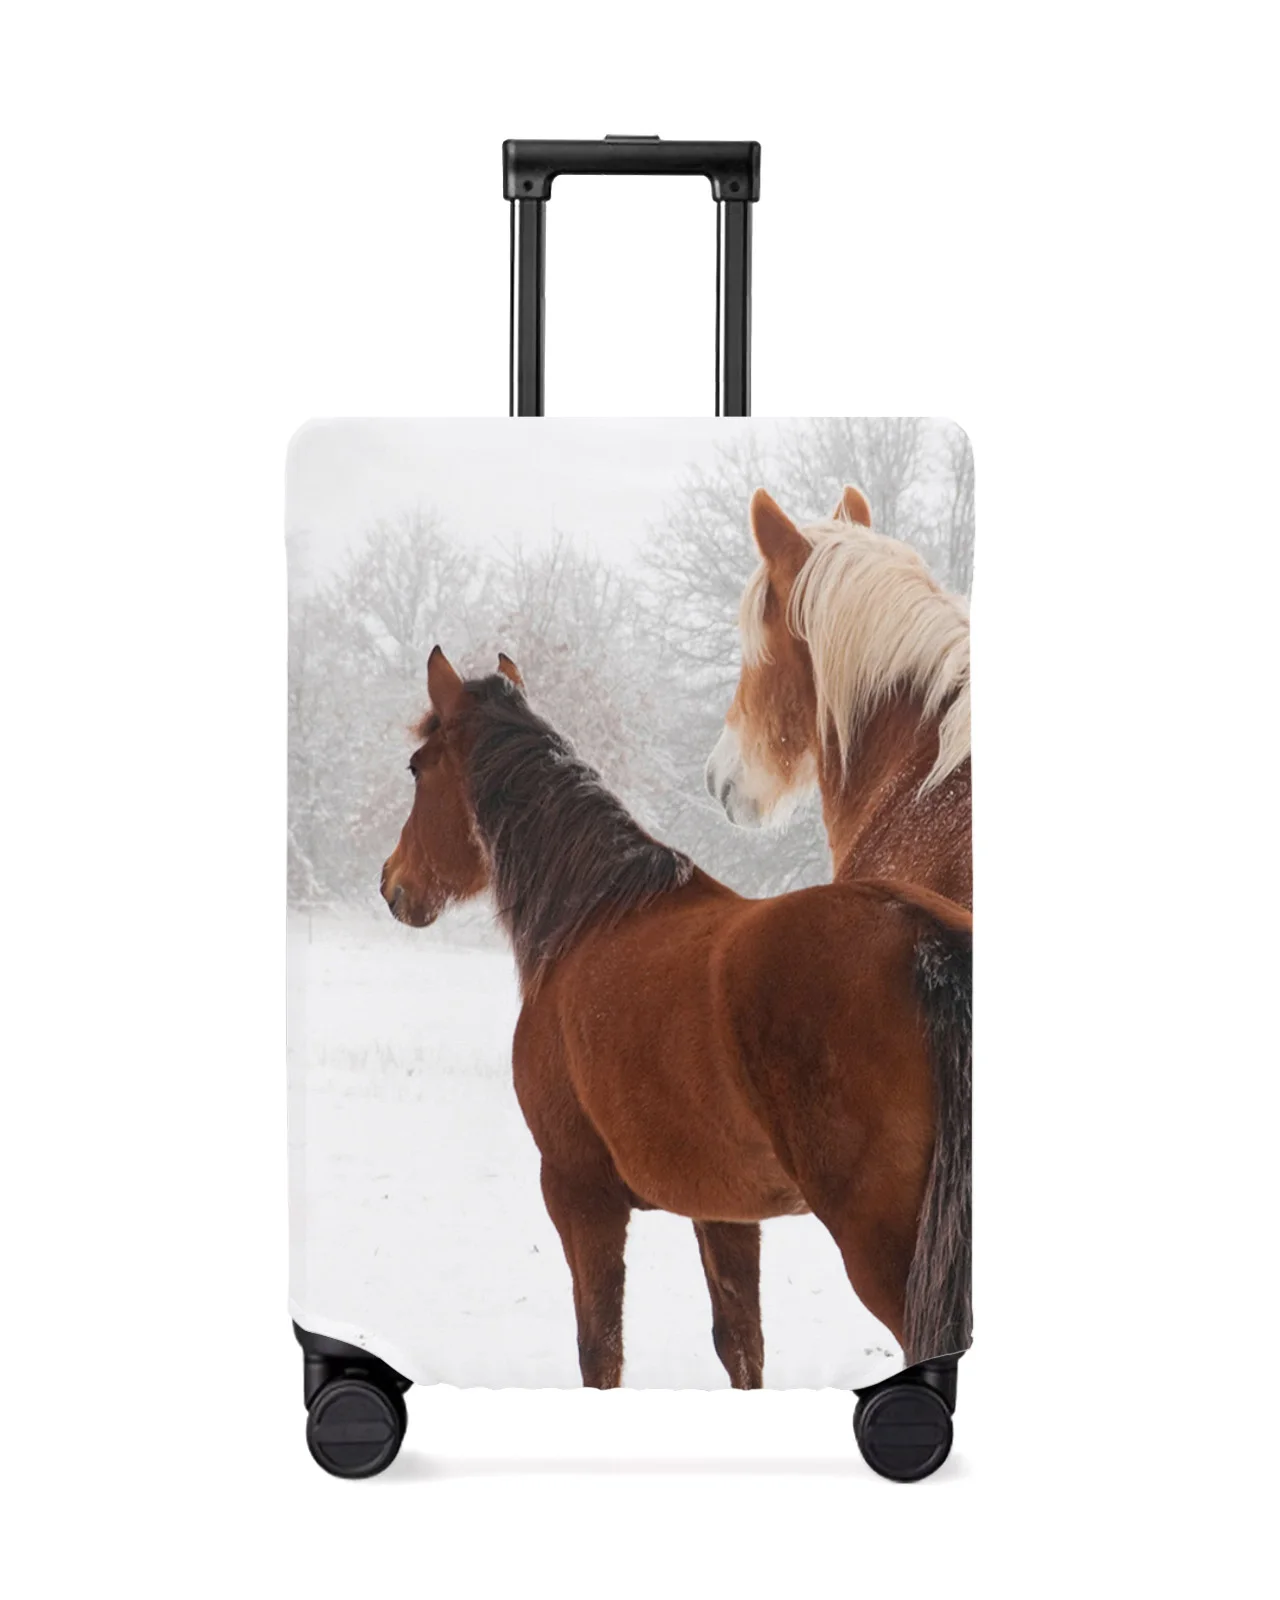 horse-snow-scene-animal-travel-luggage-protective-cover-for-travel-accessories-suitcase-elastic-dust-case-protect-sleeve